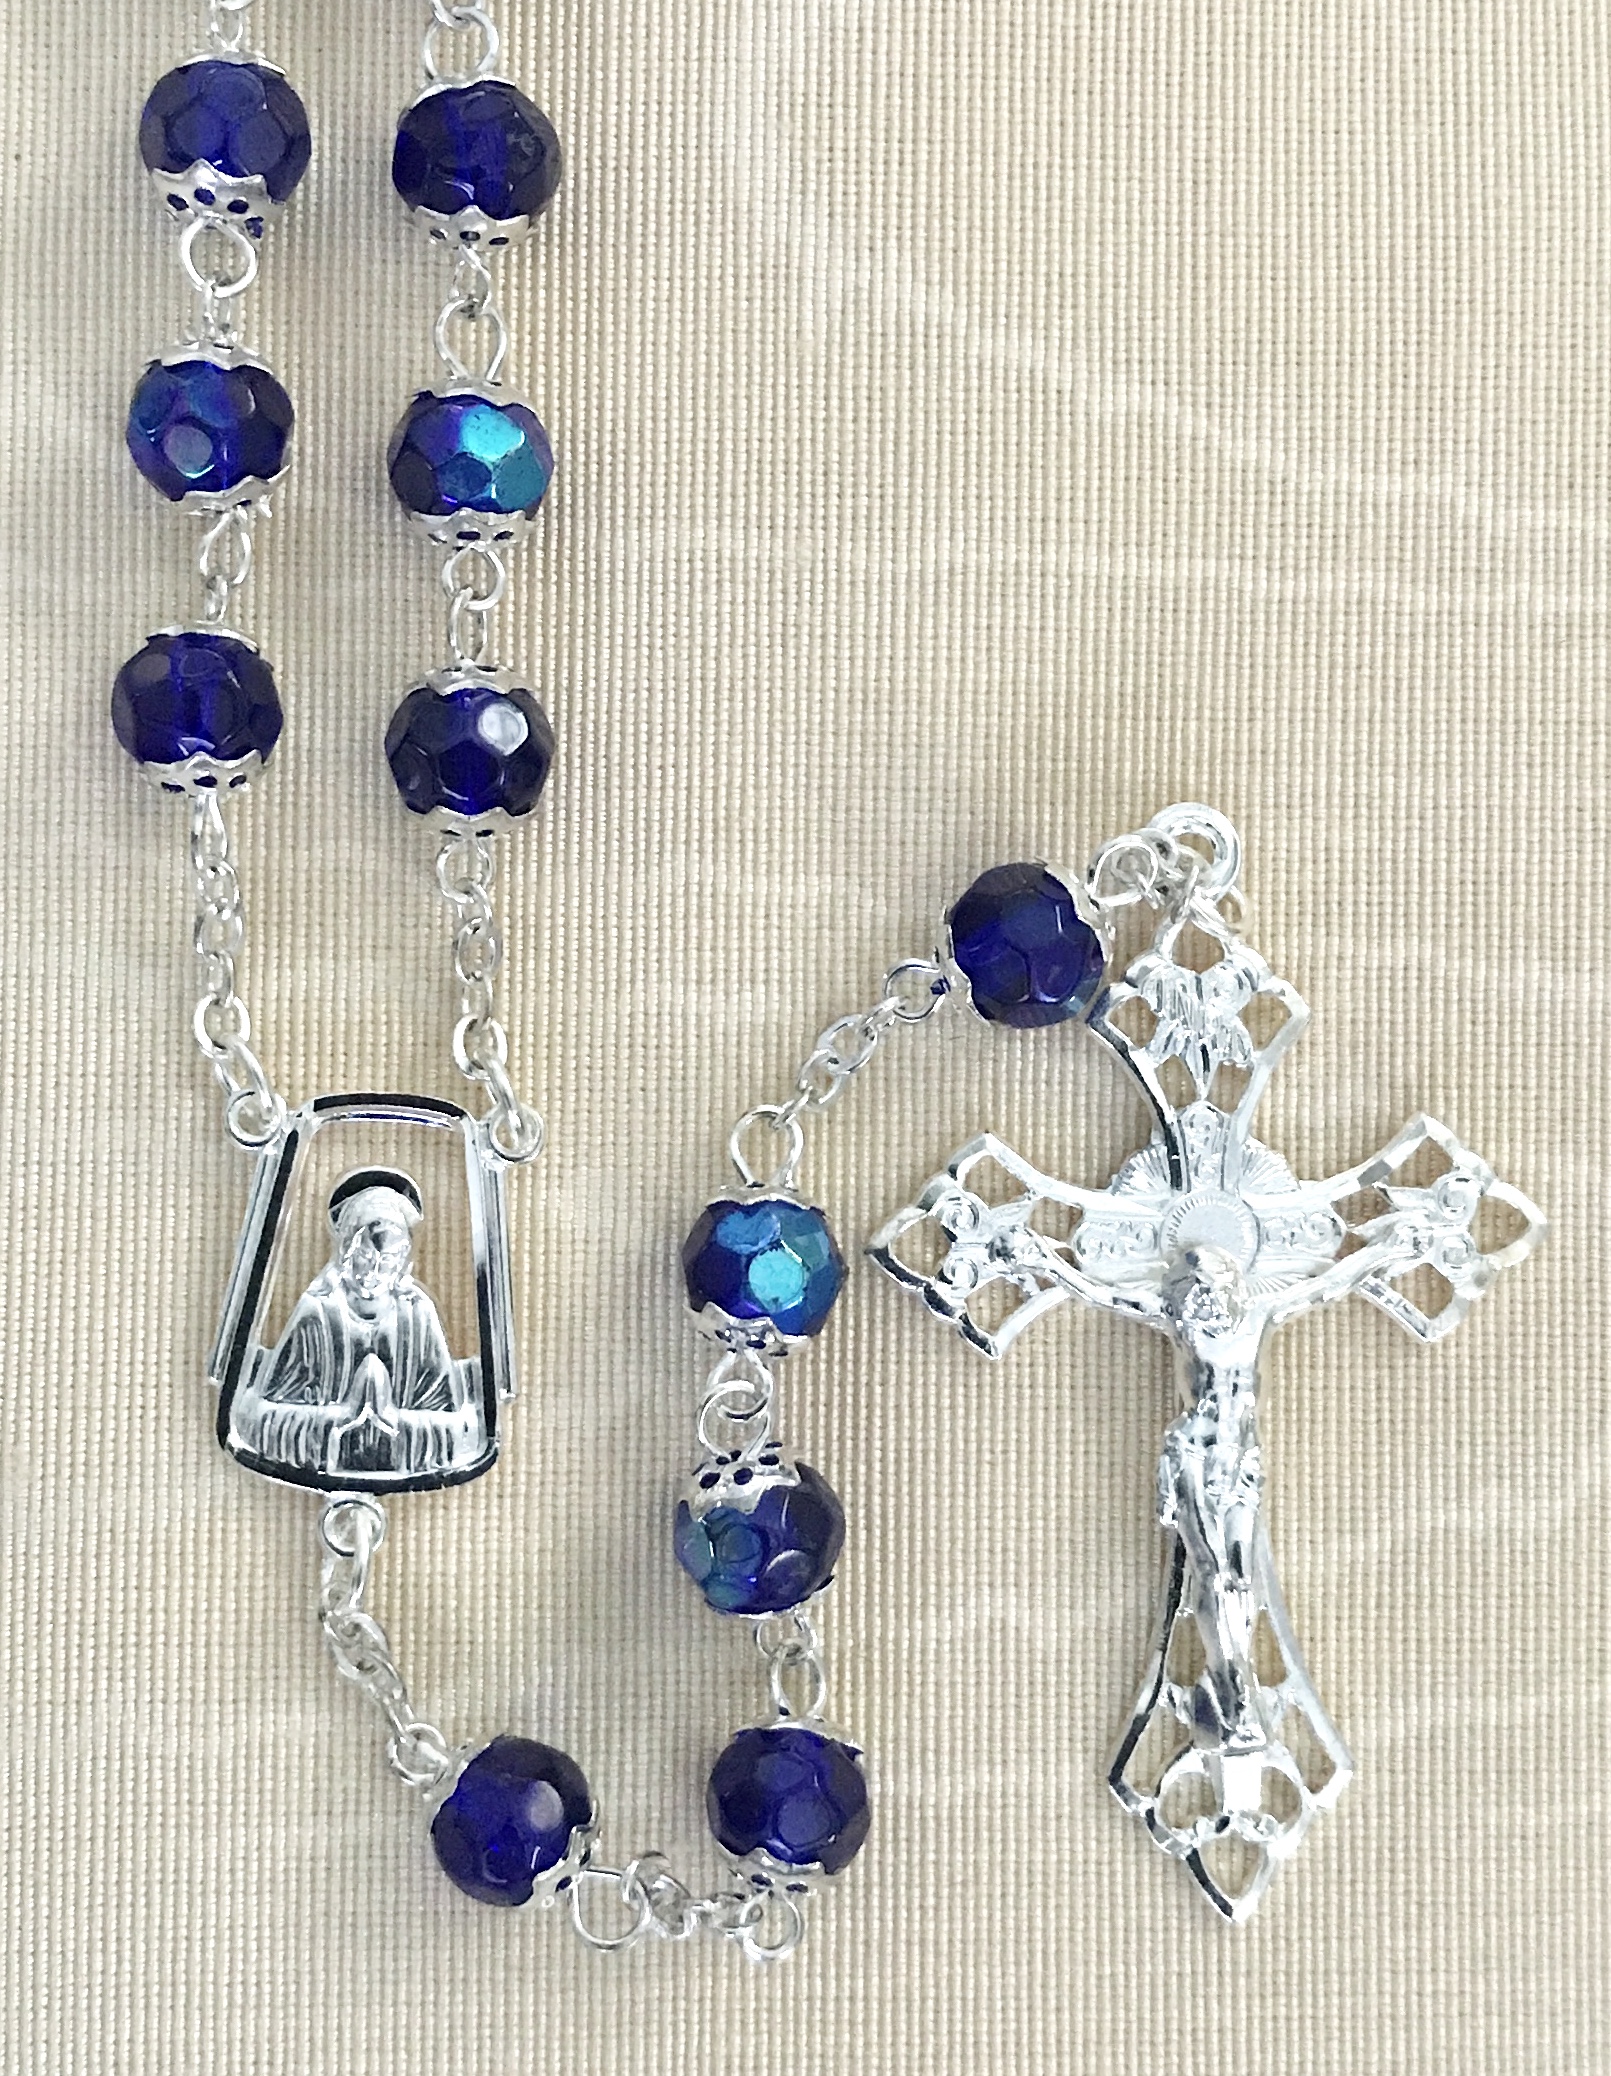 7mm BLUE GLASS AB DOUBLE CAPPED ROSARY WITH STERLING SILVER PLATED CRUCIFIX AND CENTER GIFT BOXED